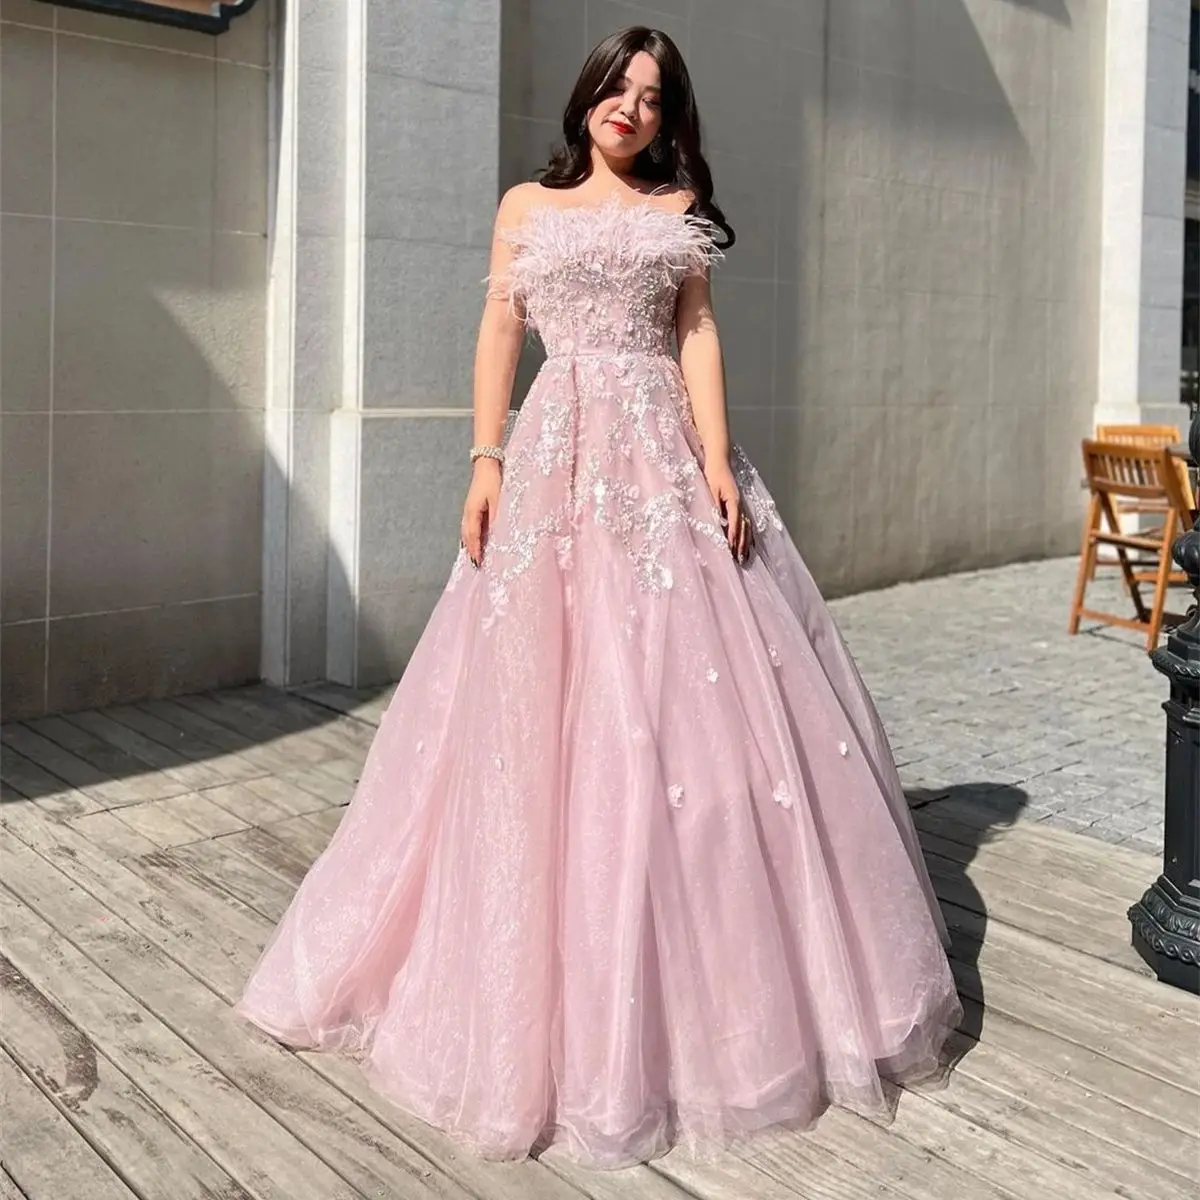 

Duricve Lace Appliques Beading Pink Prom Dress Off the Shoulder Evening Dresses Party Gowns for Women Balll Gown Floor Length